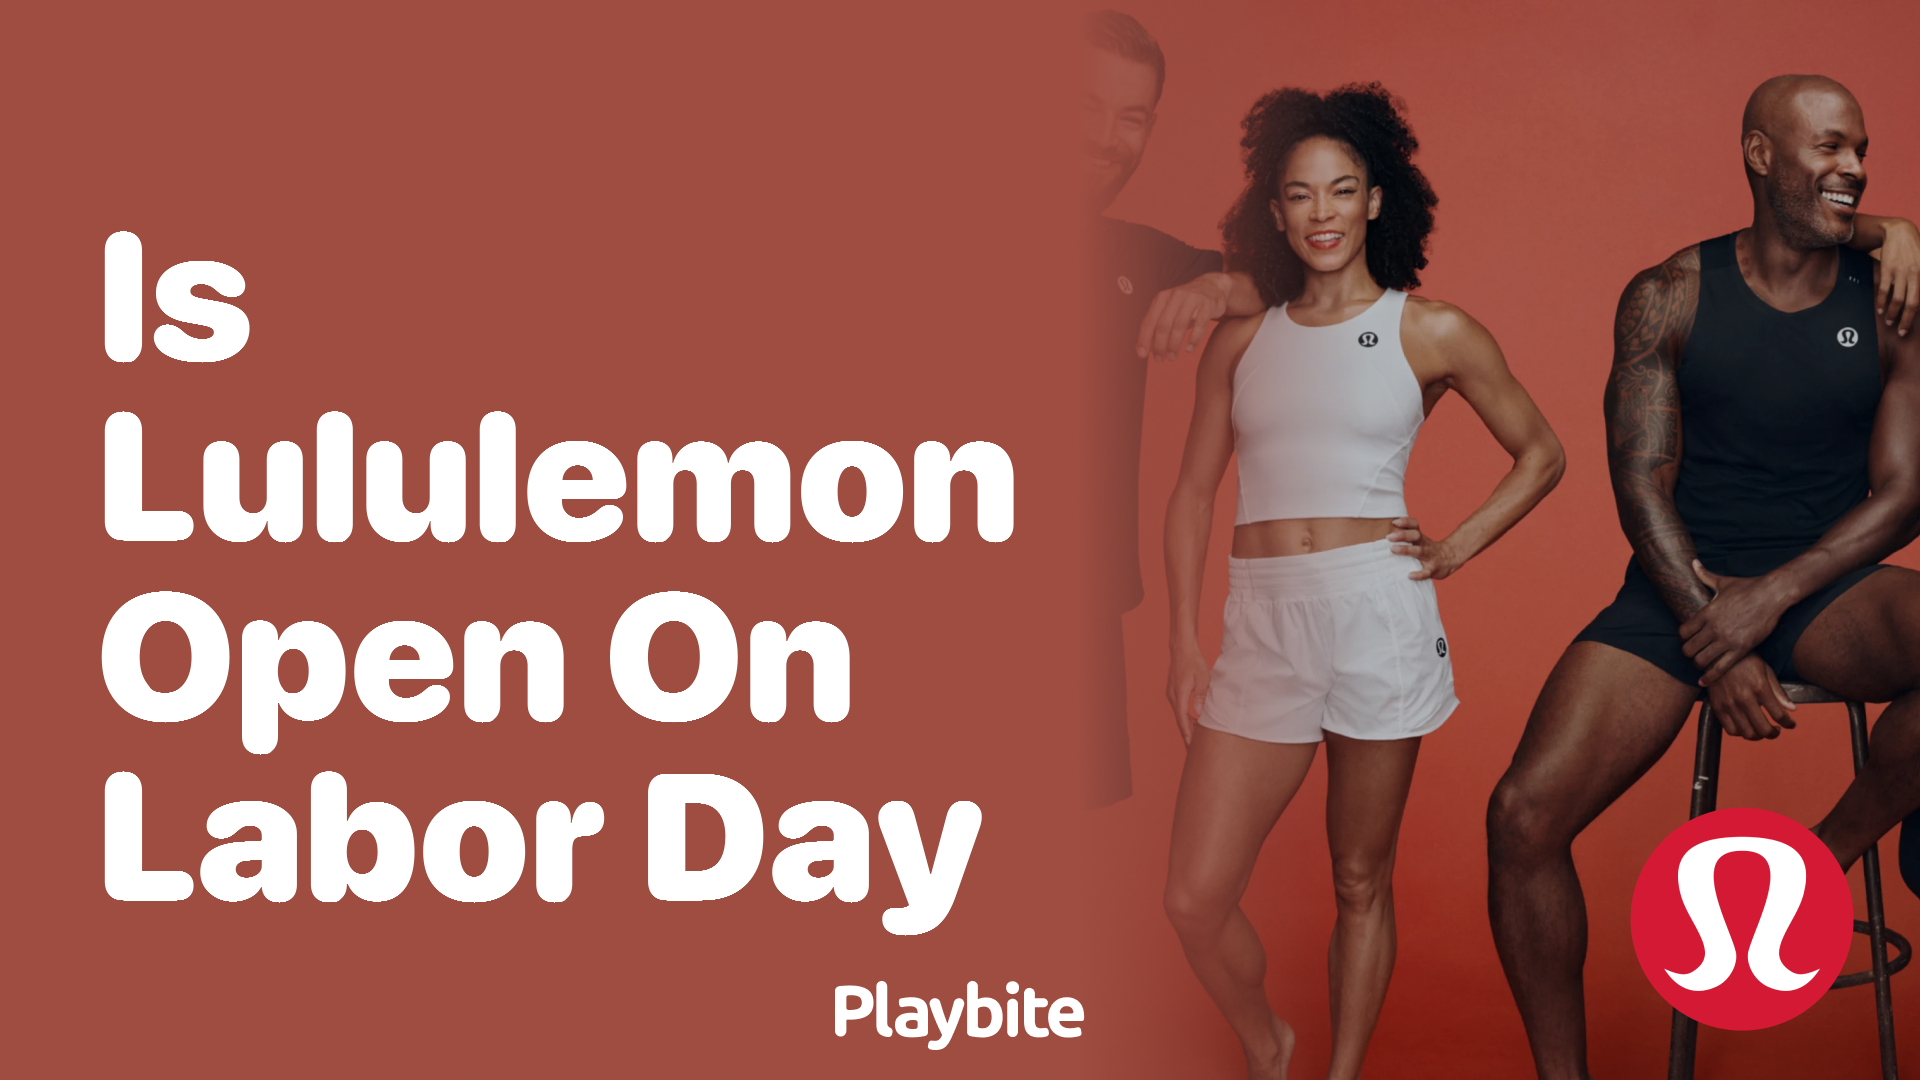 Does Lululemon Do Price Matching? Find Out Here! - Playbite